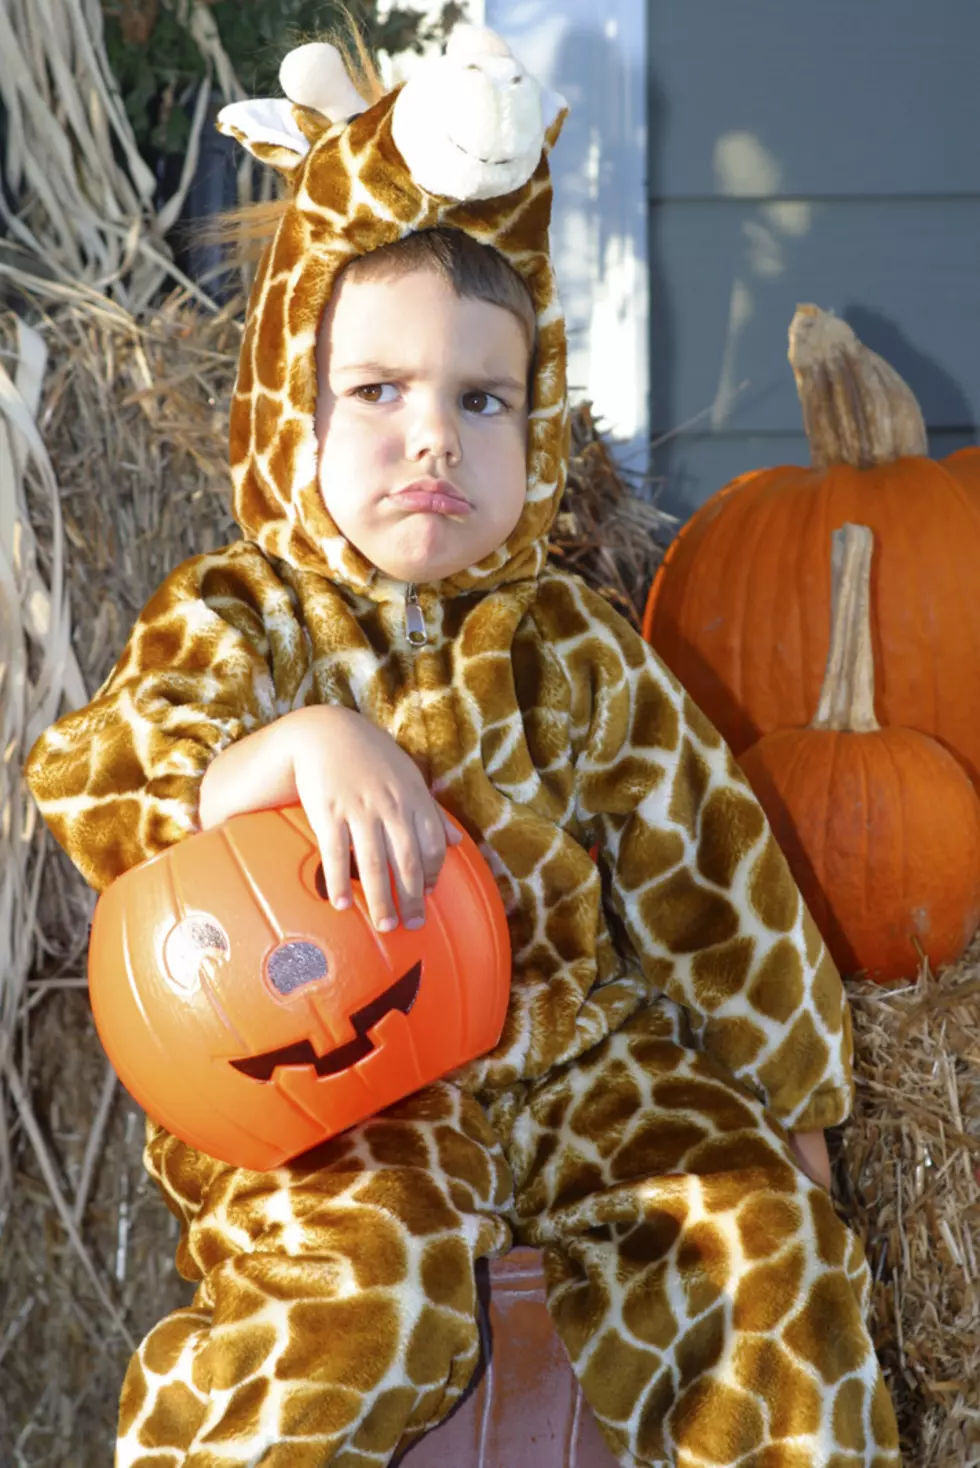 How Many East Texans Are Trick-Or-Treating This Year?